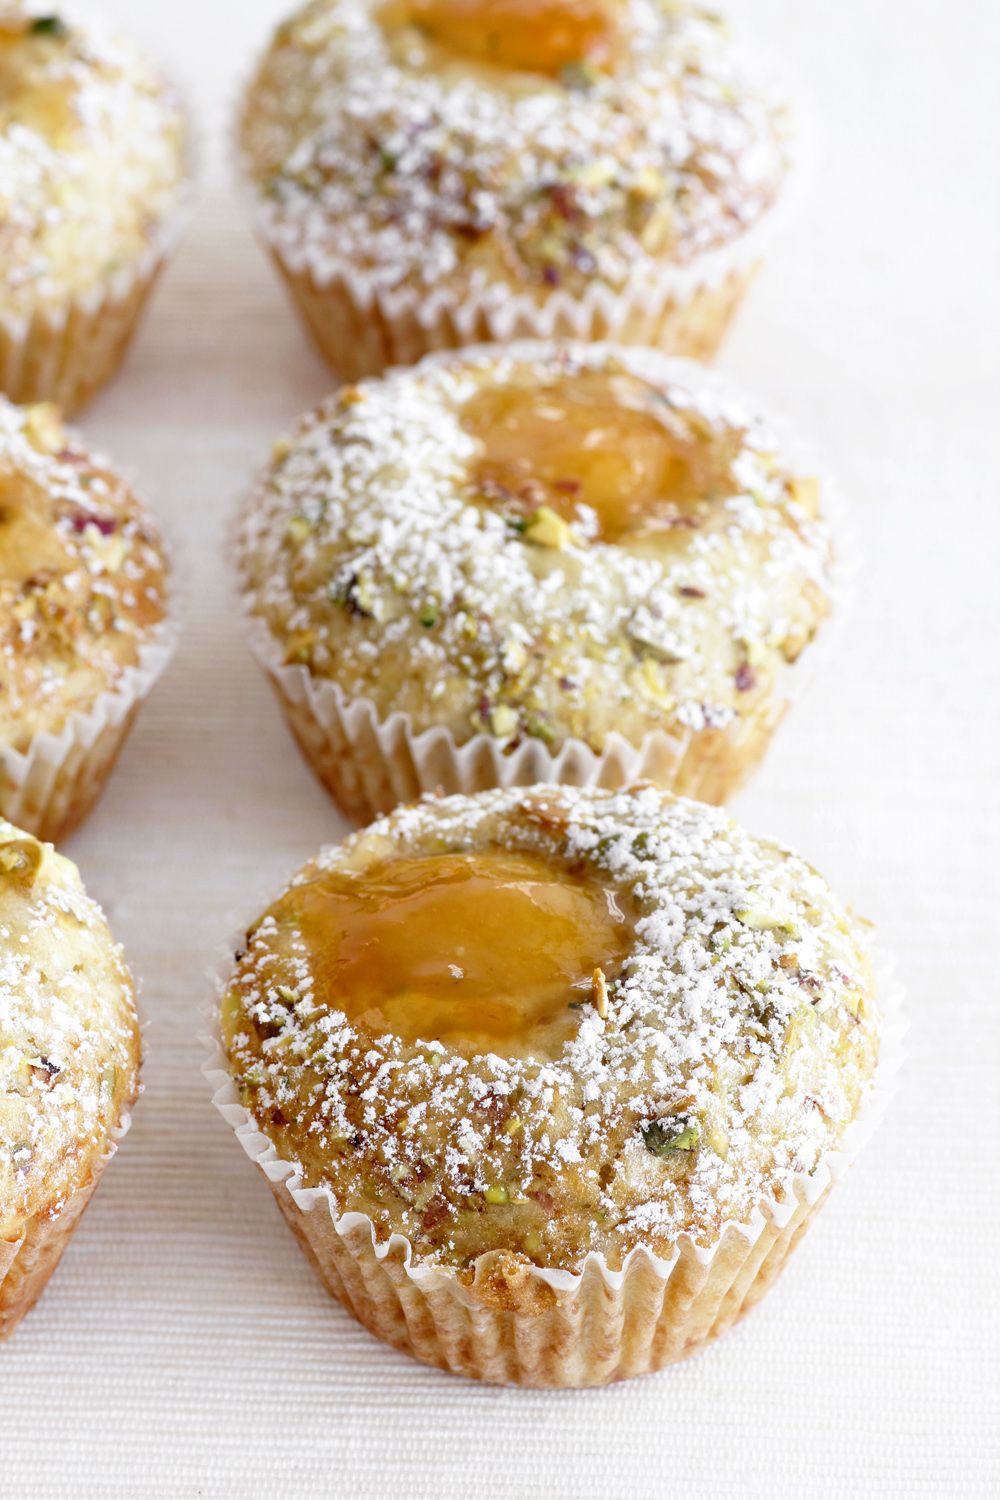 Apricot Muffins with Pistachio and Oats